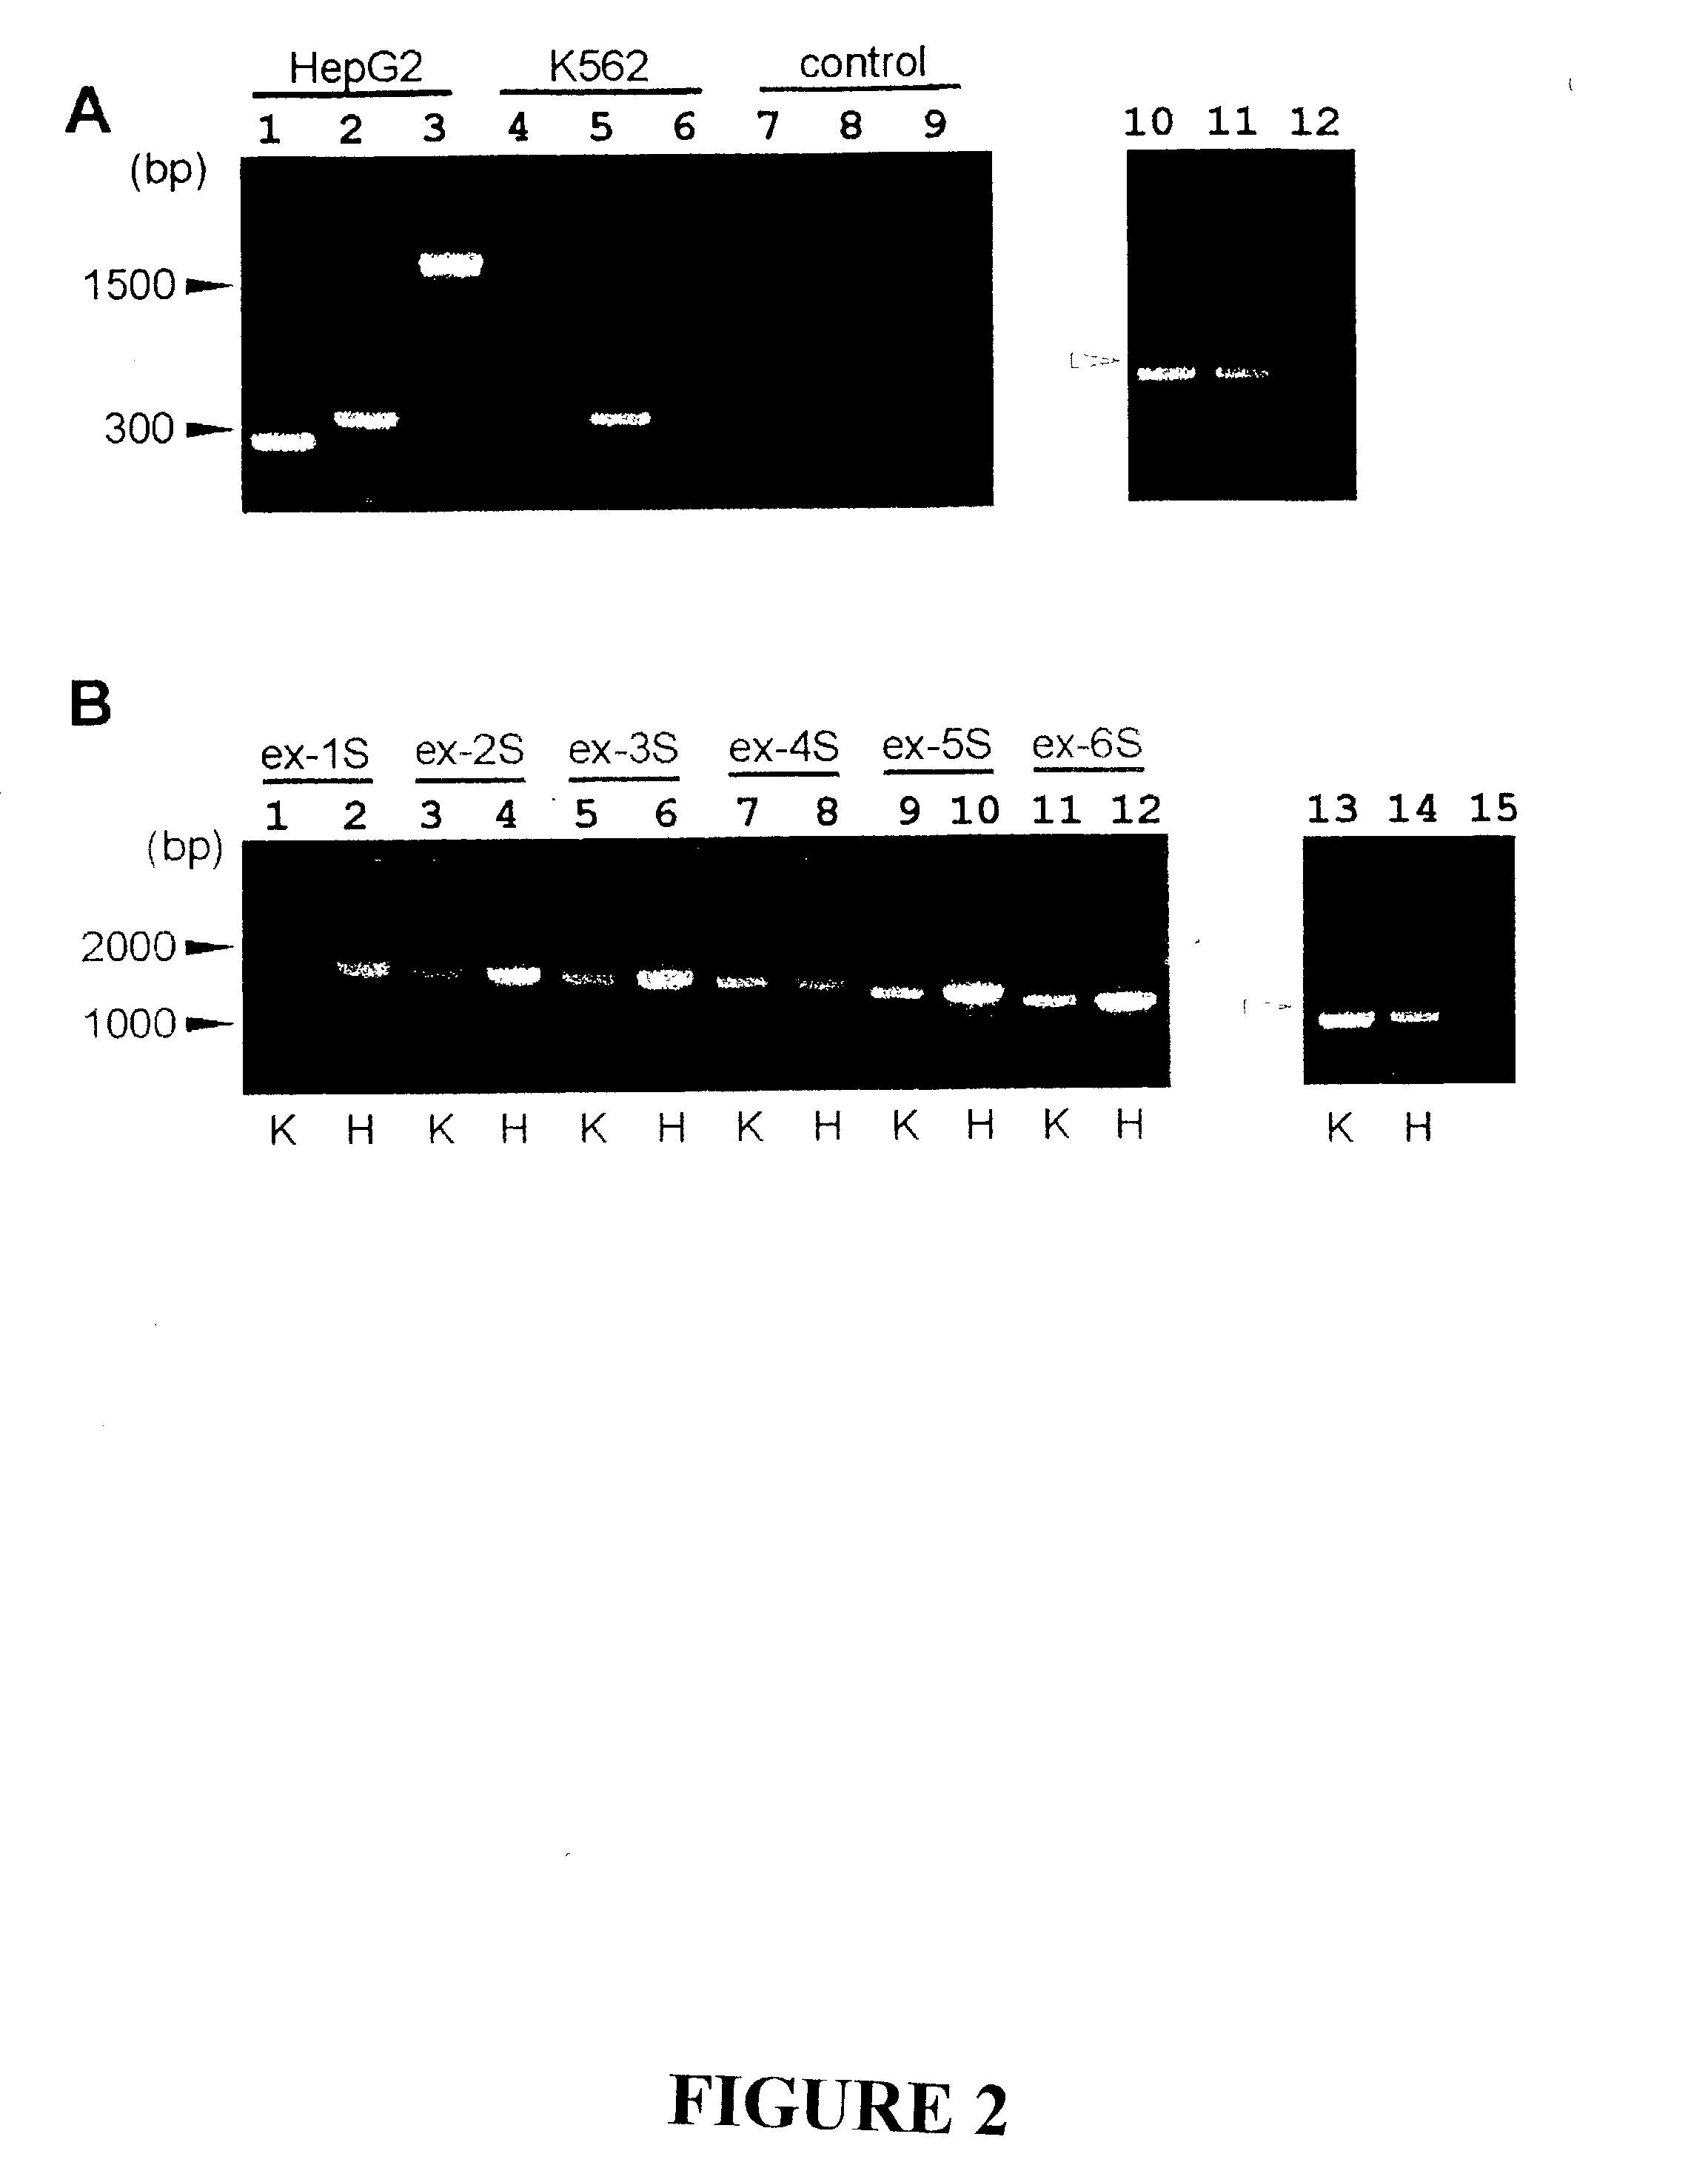 Variants of alpha-fetoprotein coding and expression sequences